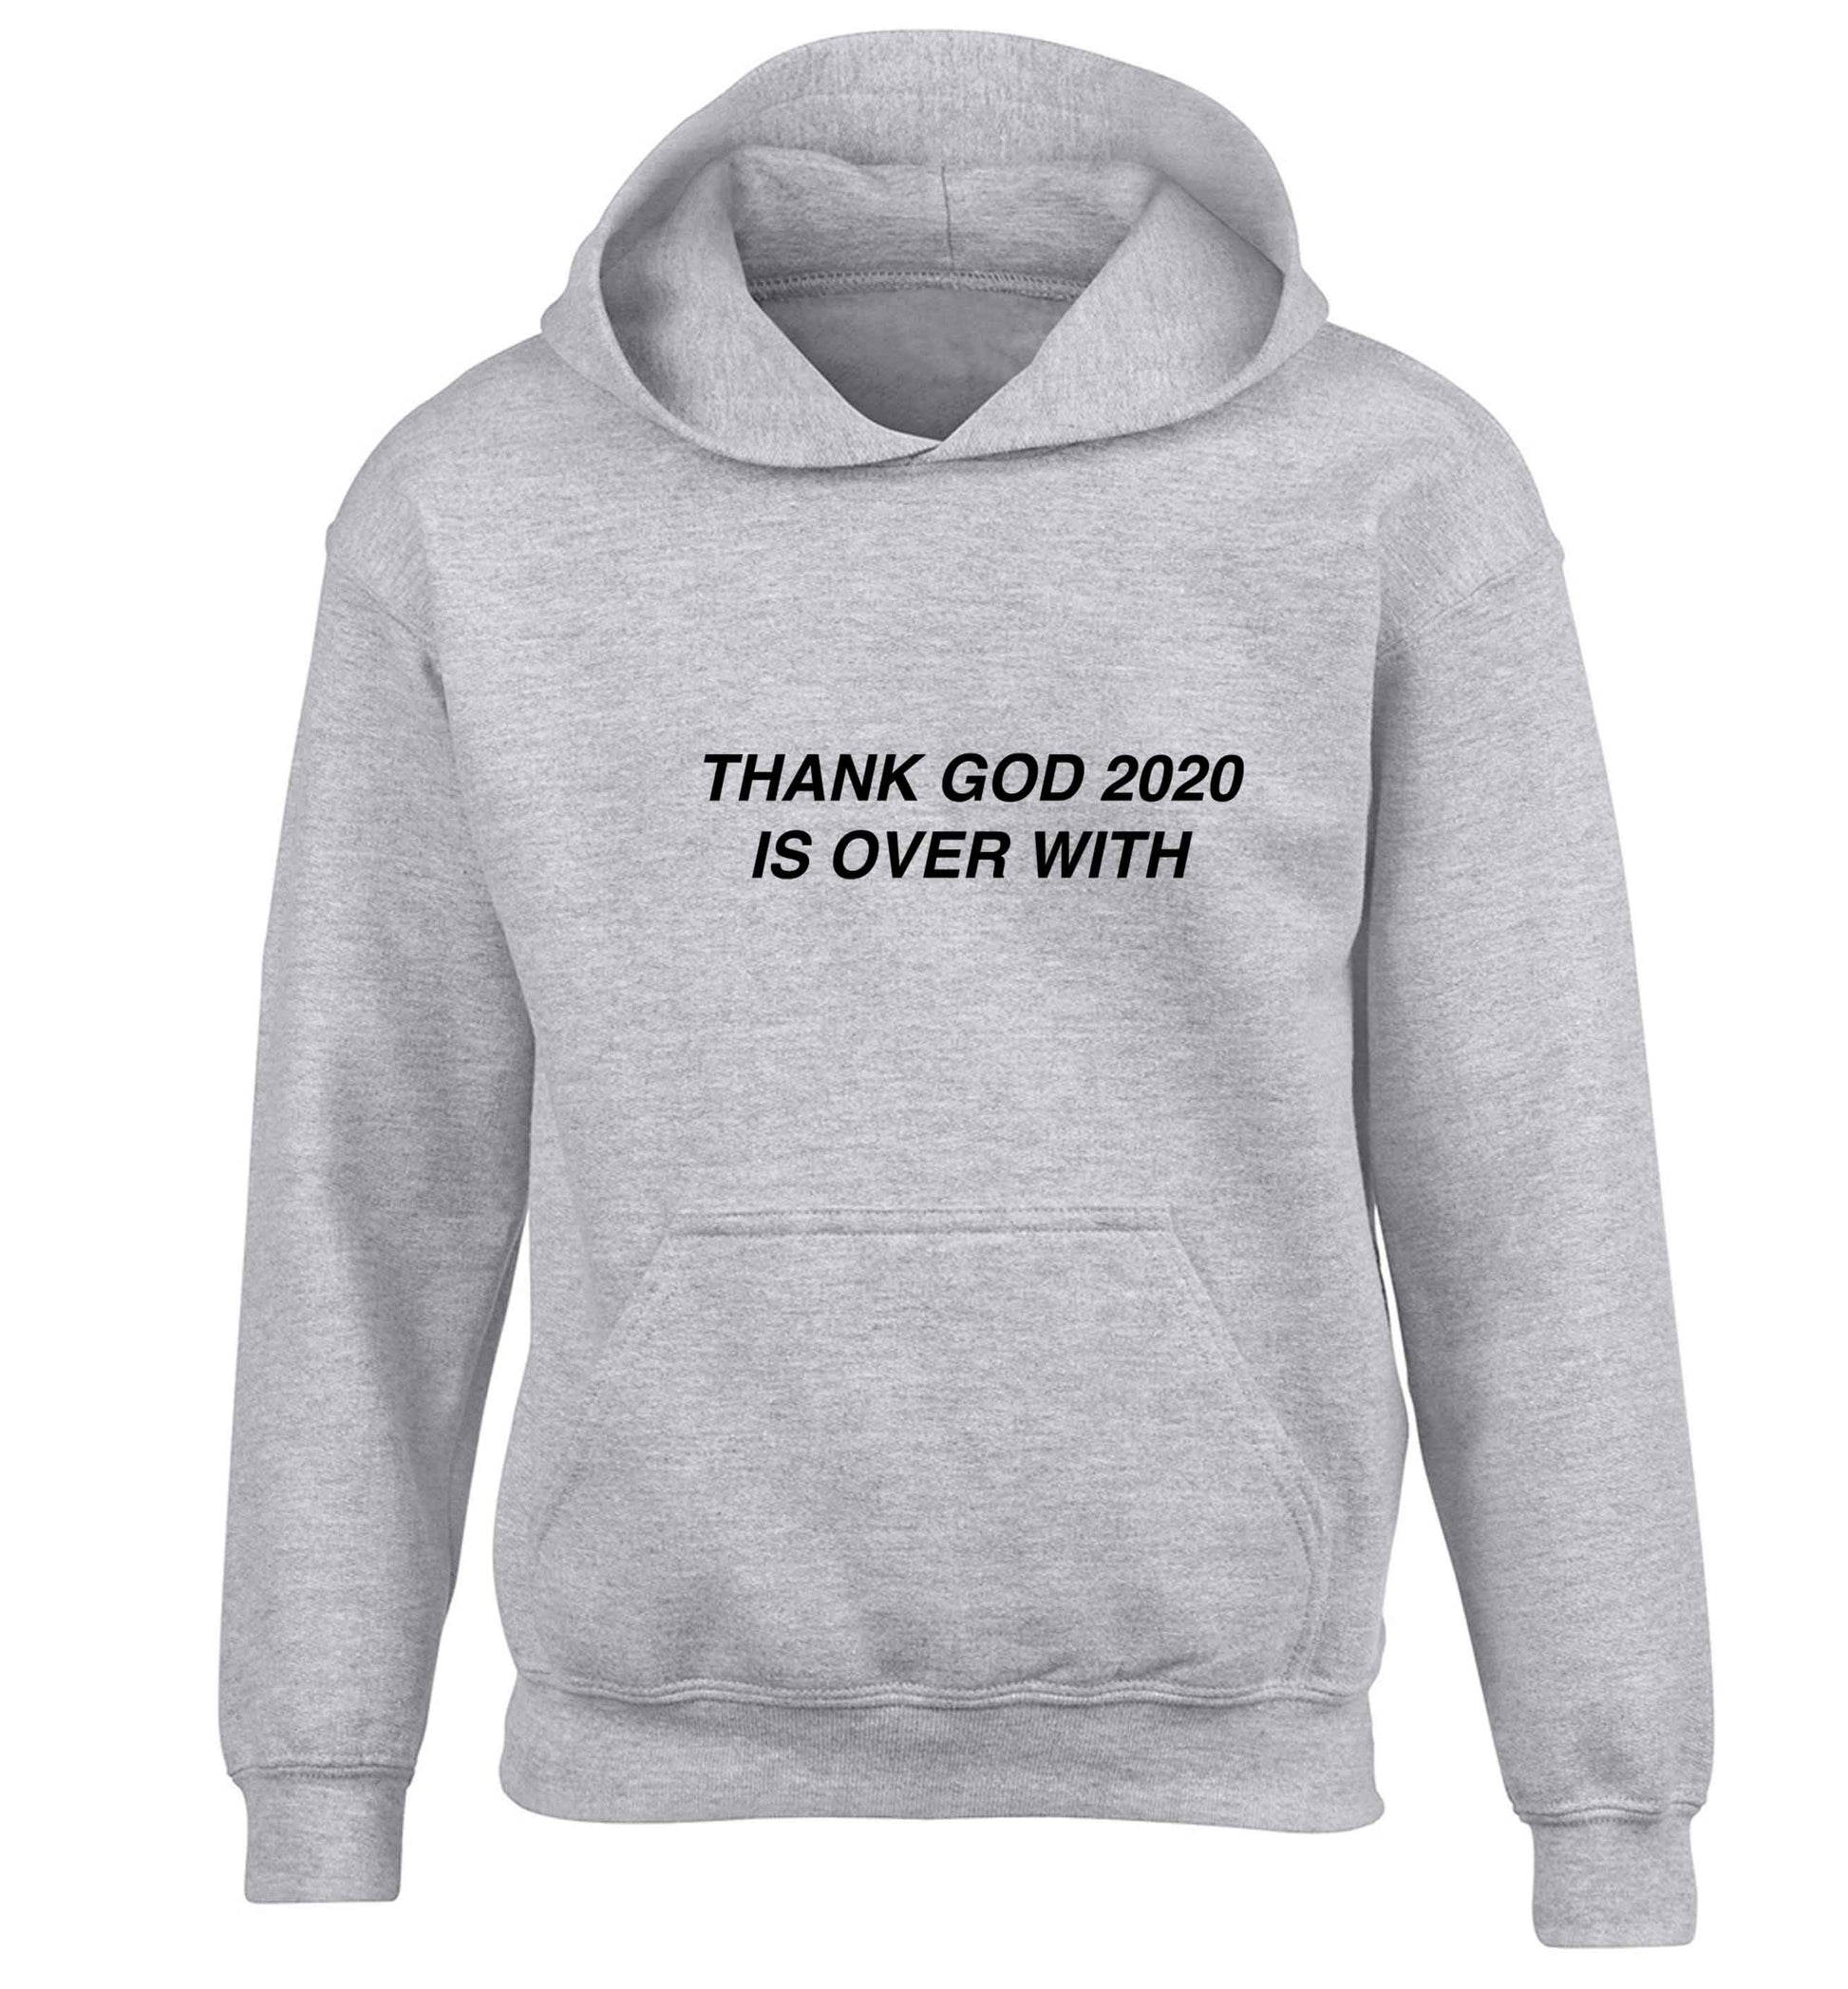 Thank god 2020 is over with children's grey hoodie 12-13 Years